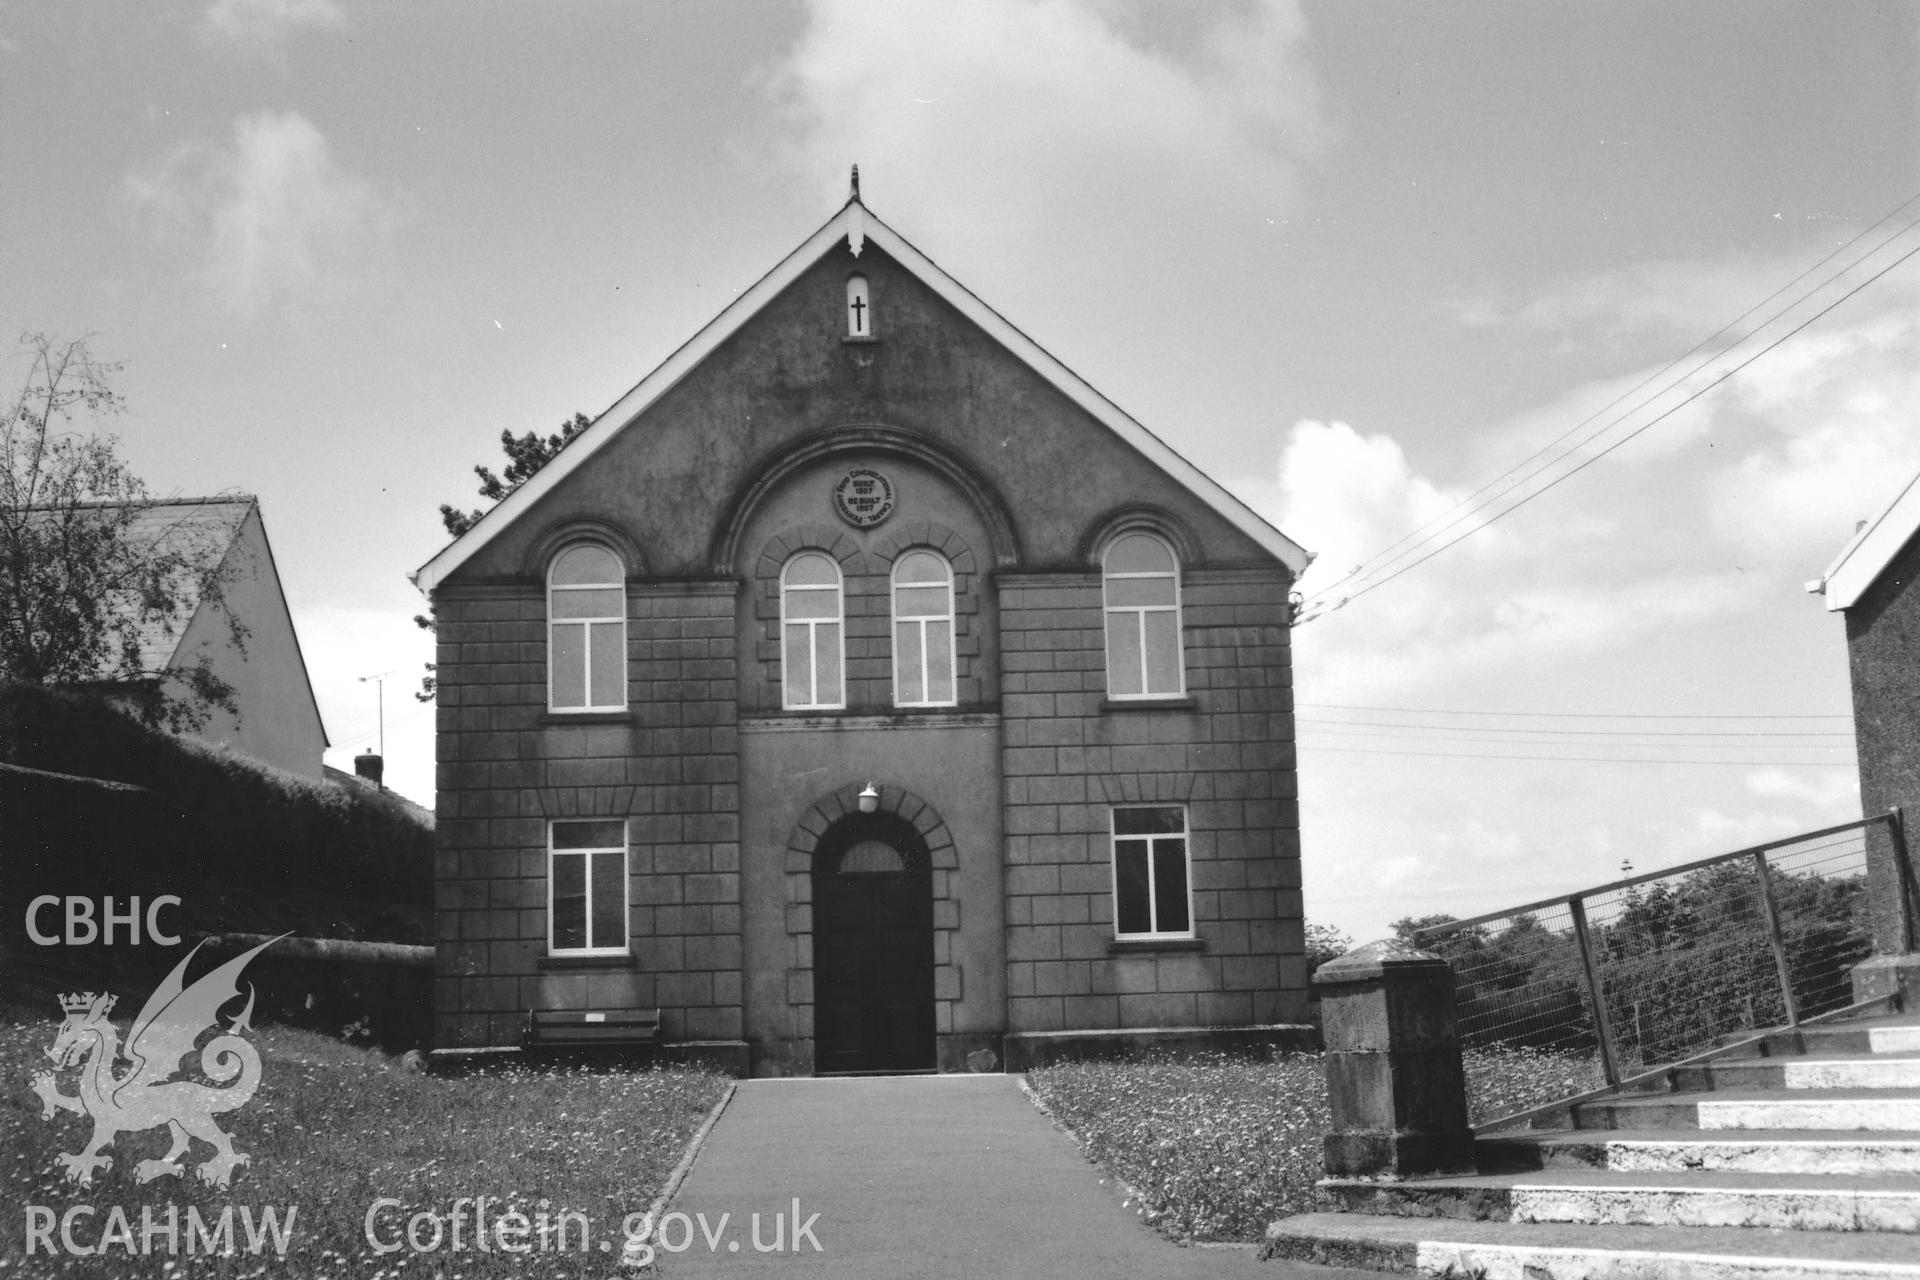 Digital copy of a black and white photograph showing a general view of Pen y Bont Independent Chapel, Hayscastle, taken by Robert Scourfield, 1996.